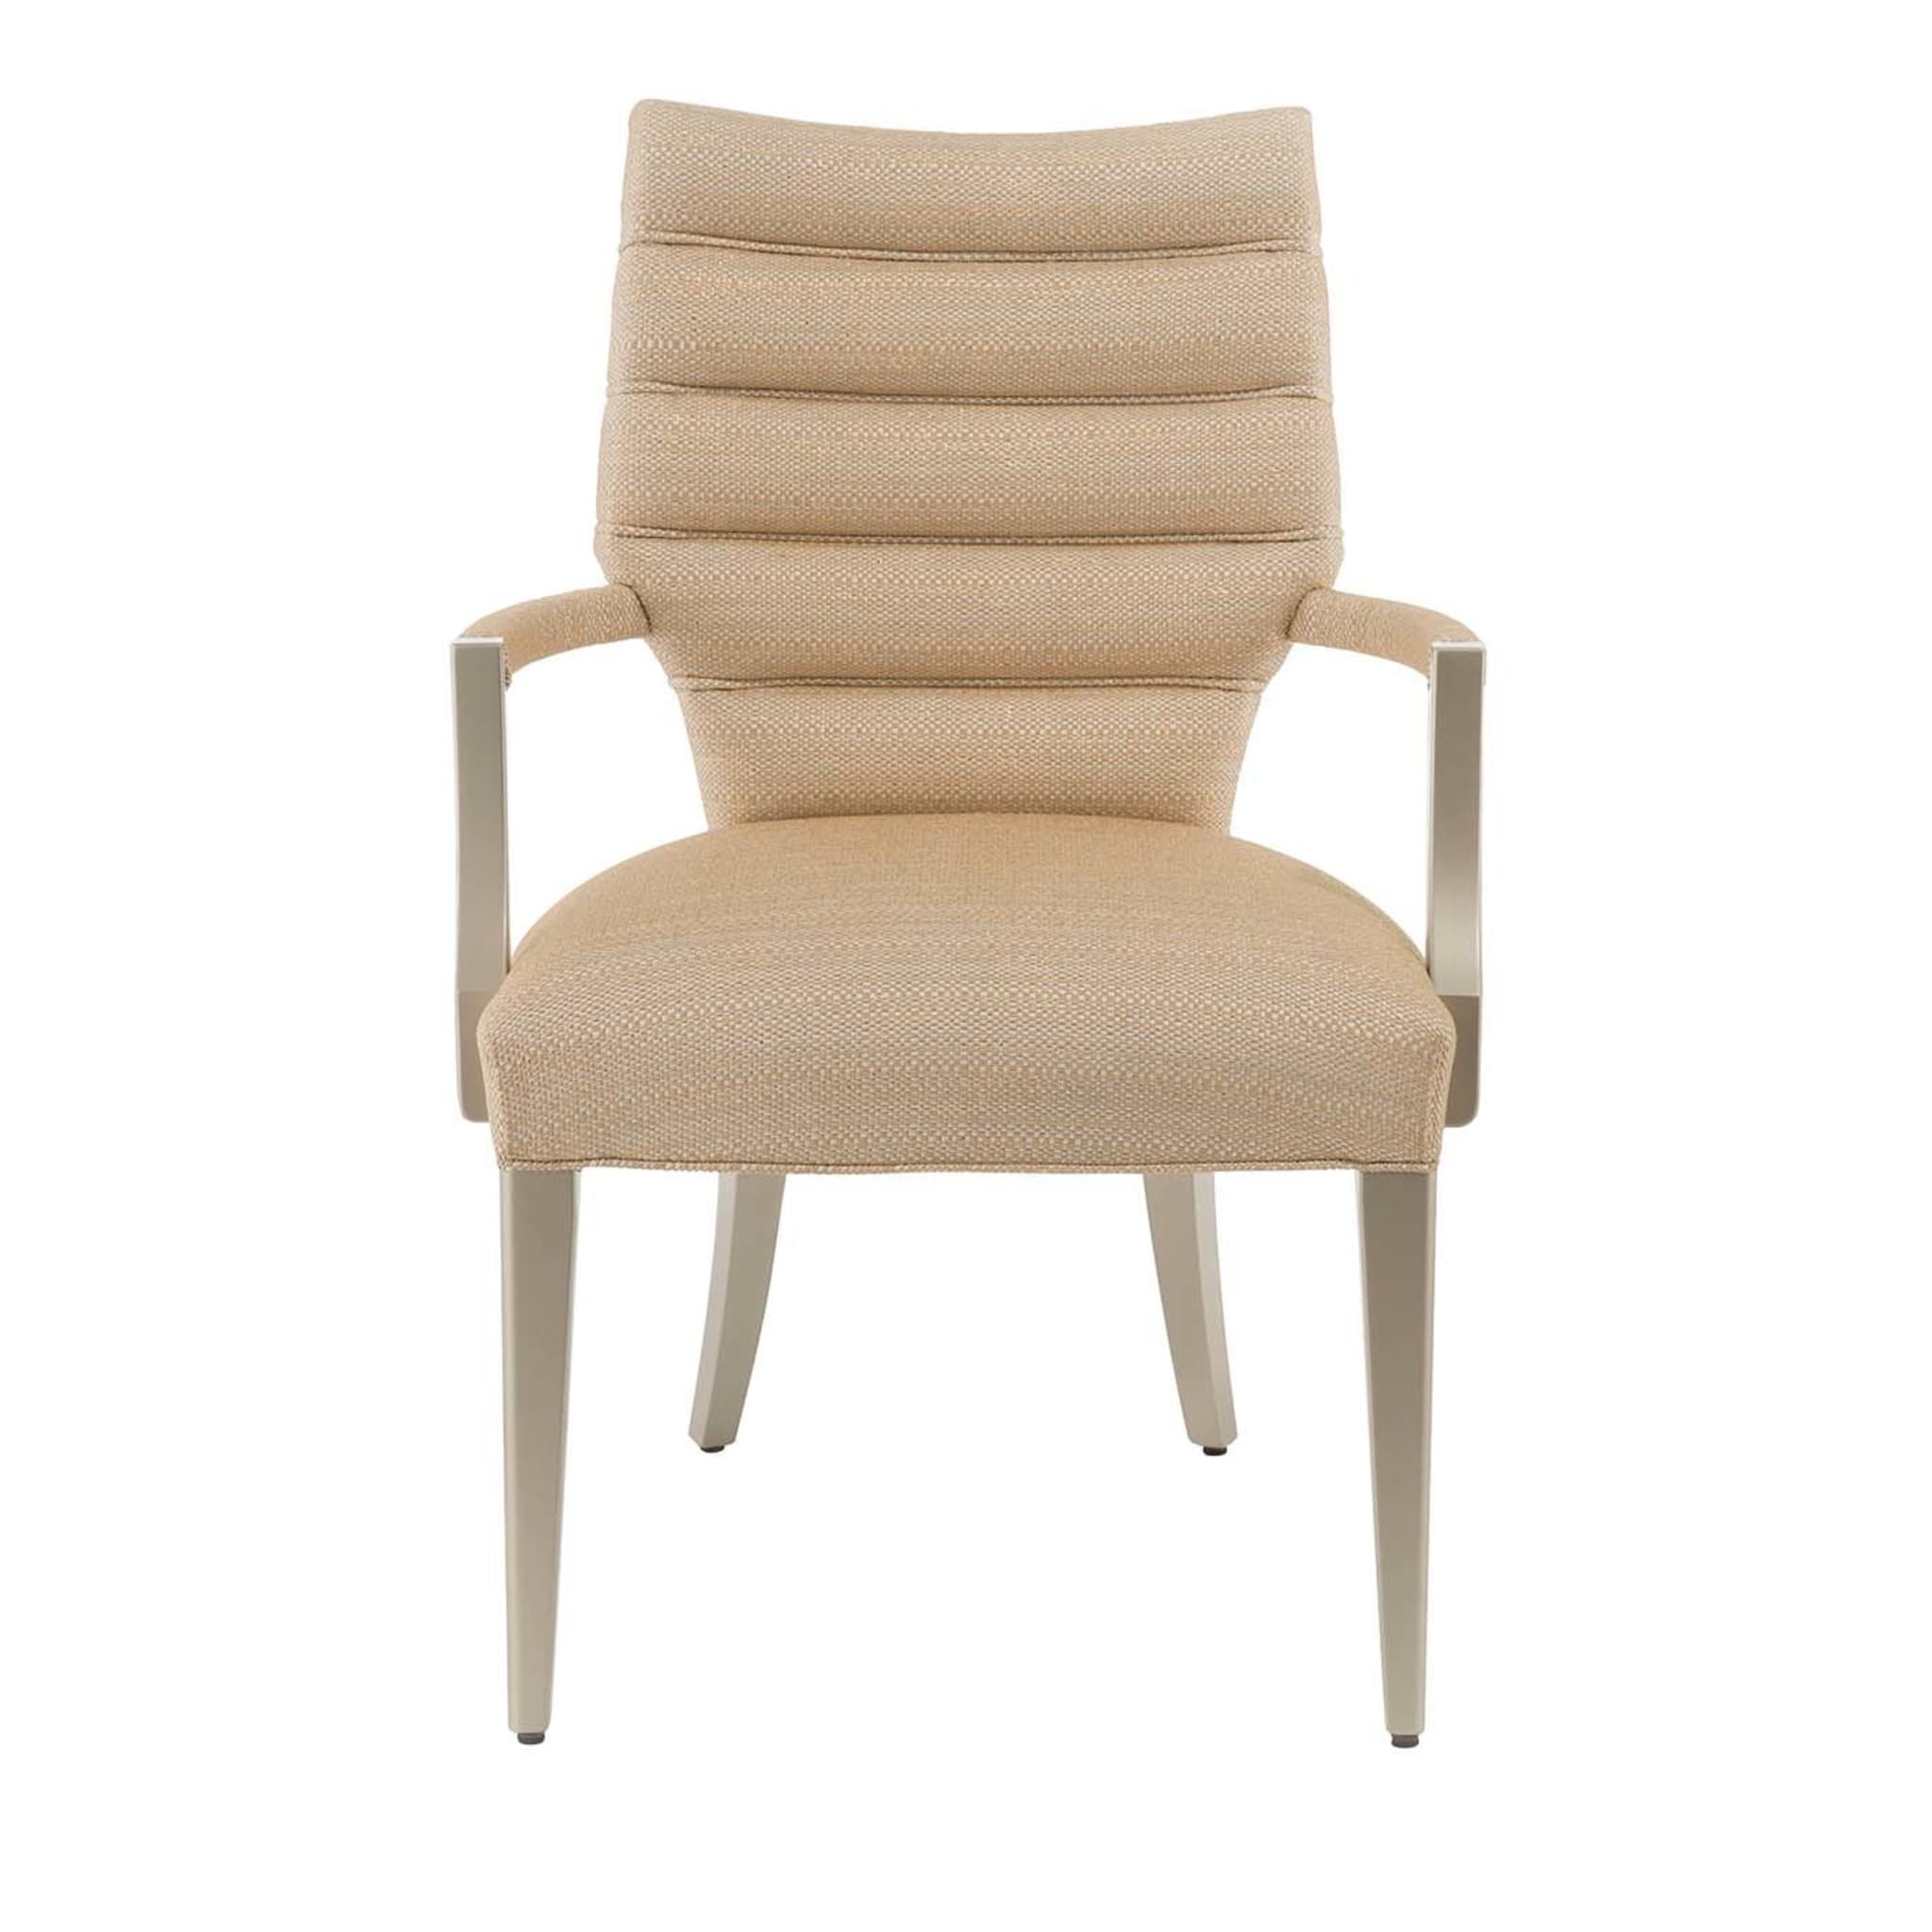 Lucrezia chair with armrests - Main view